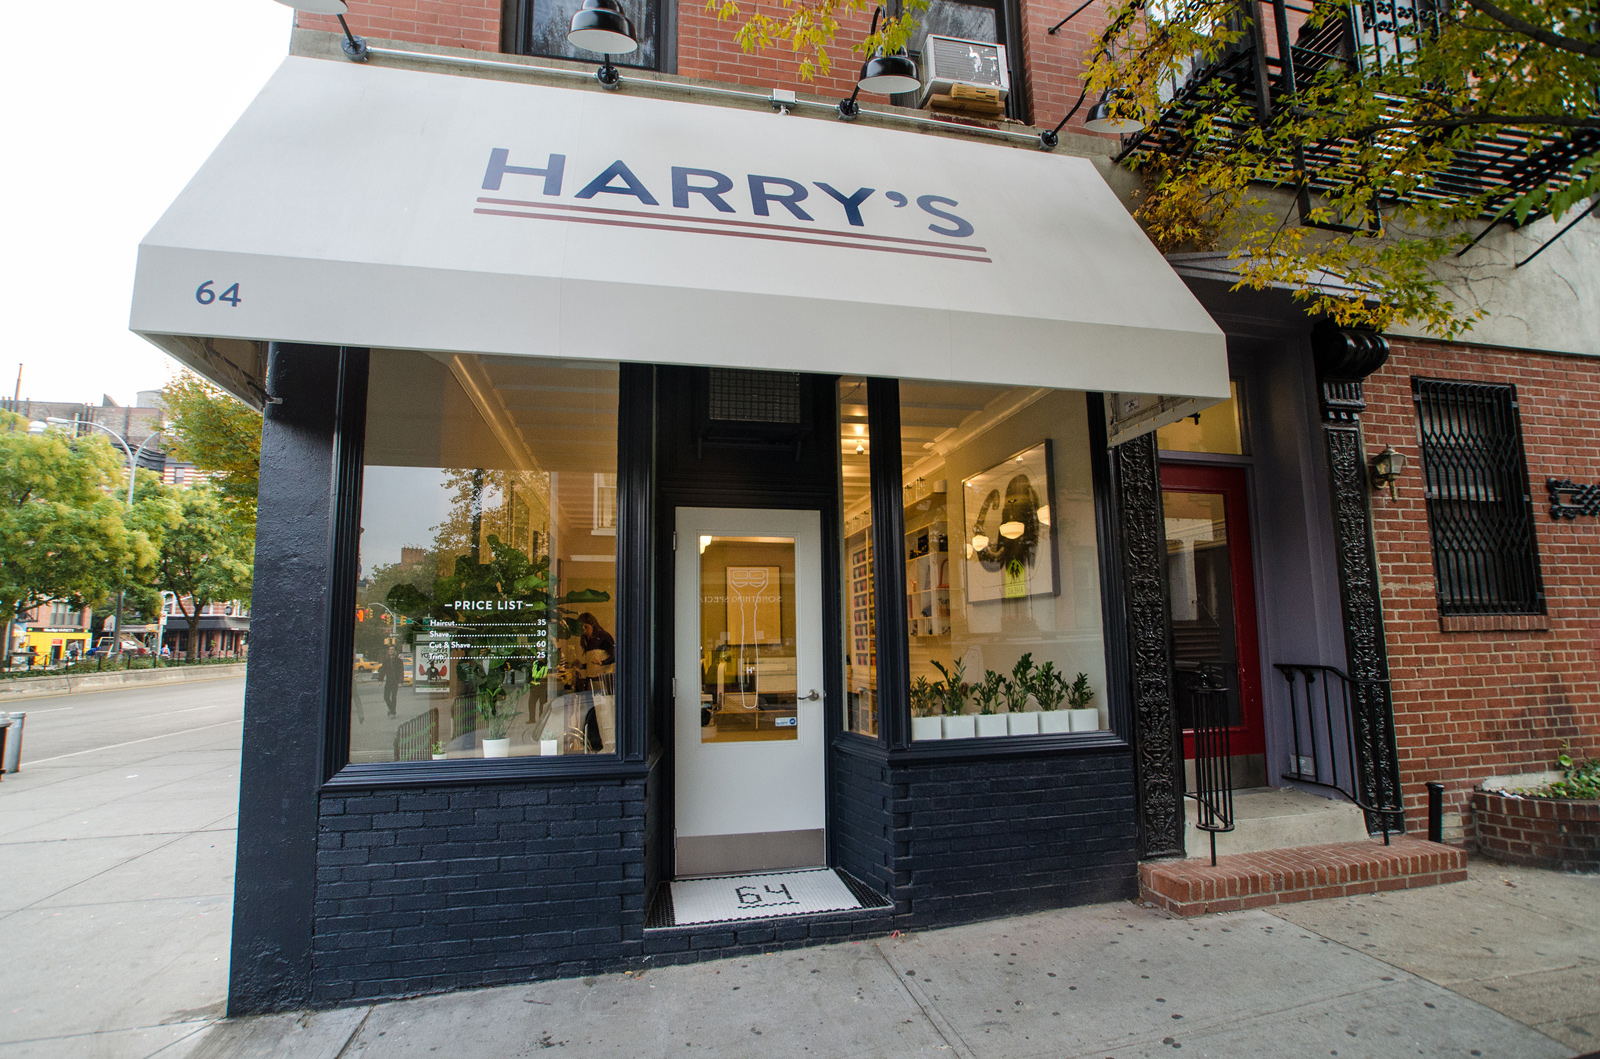 Harry's barber shop was conceived as a 'corner shop'. Photography Dave Pinter